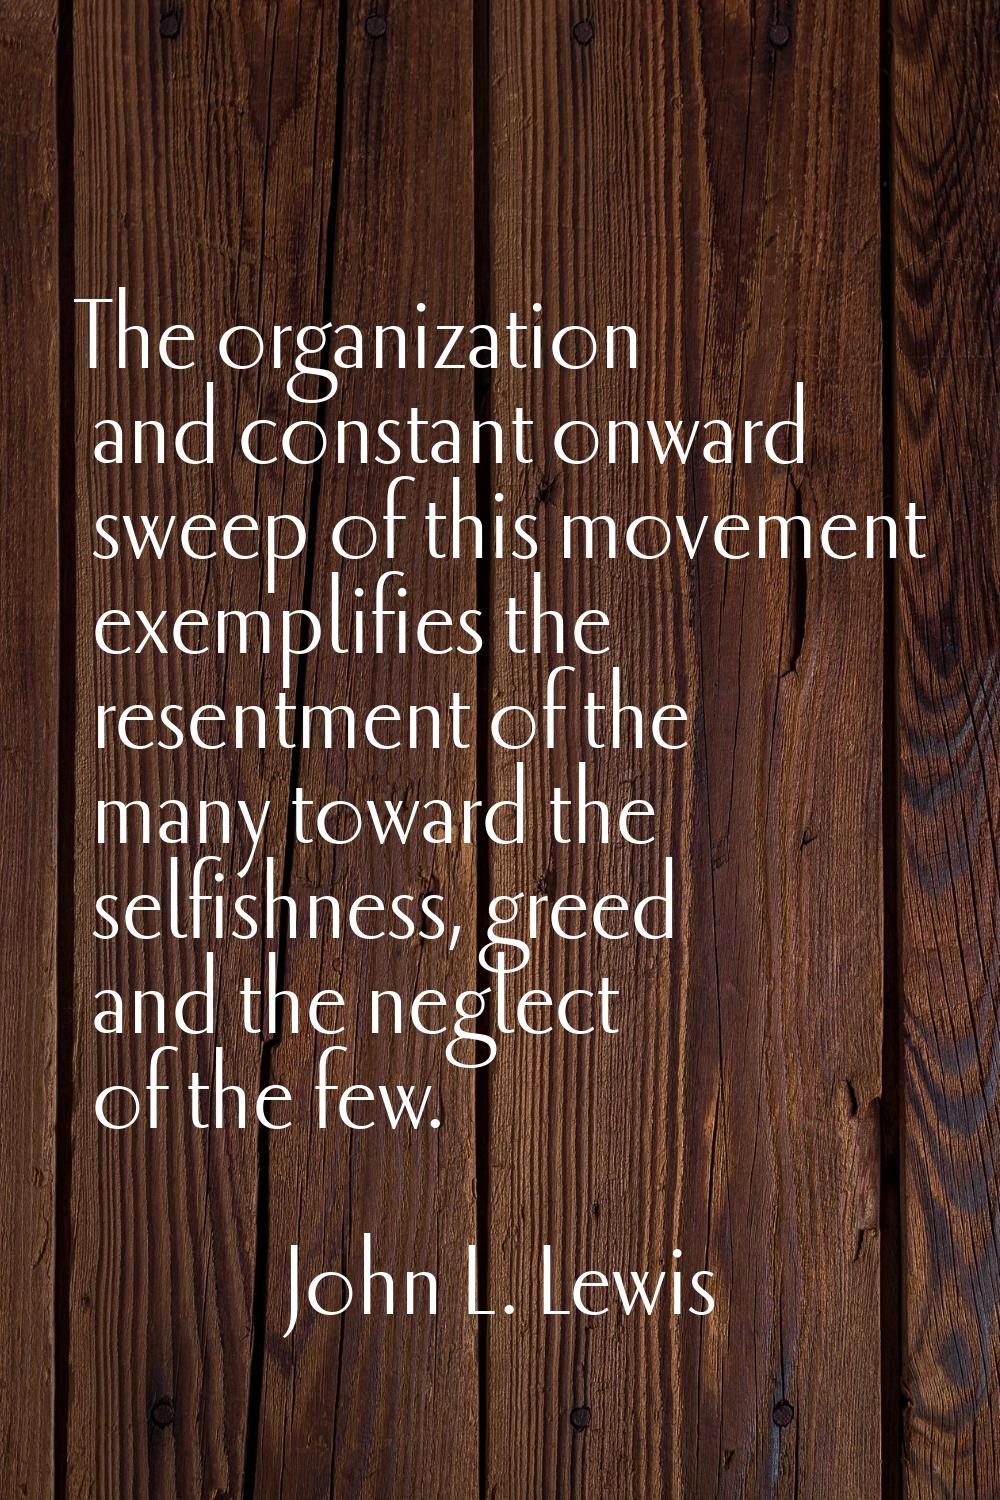 The organization and constant onward sweep of this movement exemplifies the resentment of the many 